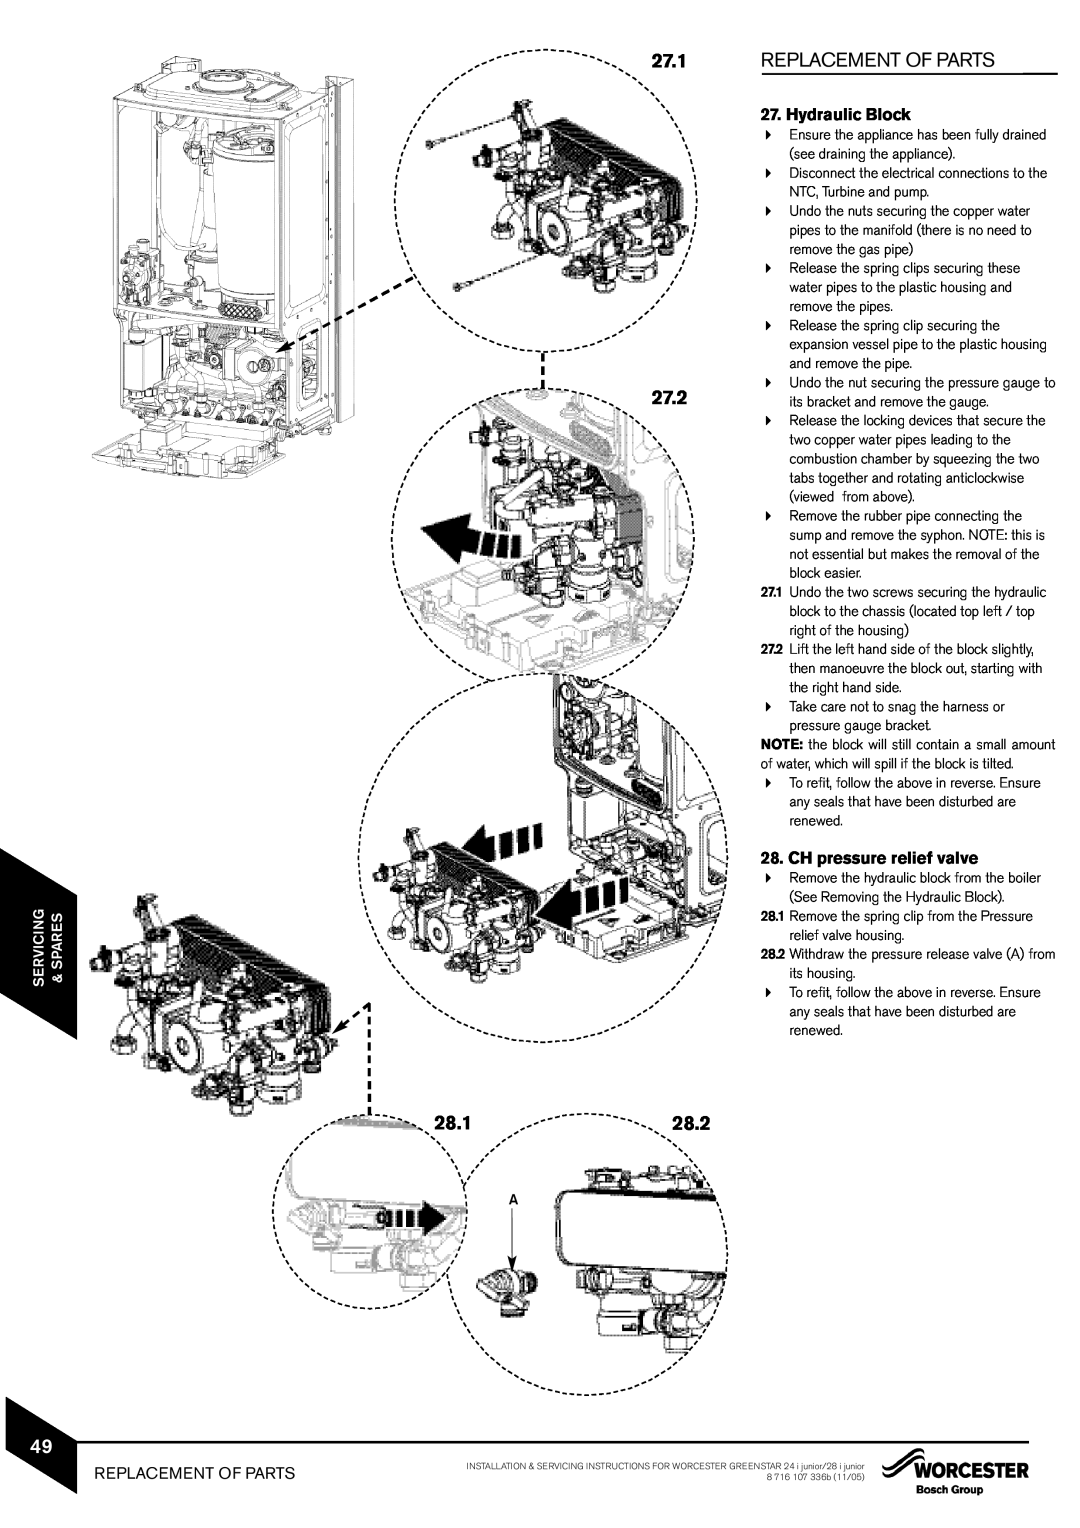 Bosch Appliances 28i junior manual Replacement Of Parts, 28.1, 28.2, 27.1, Hydraulic Block, 27.2, CH pressure relief valve 